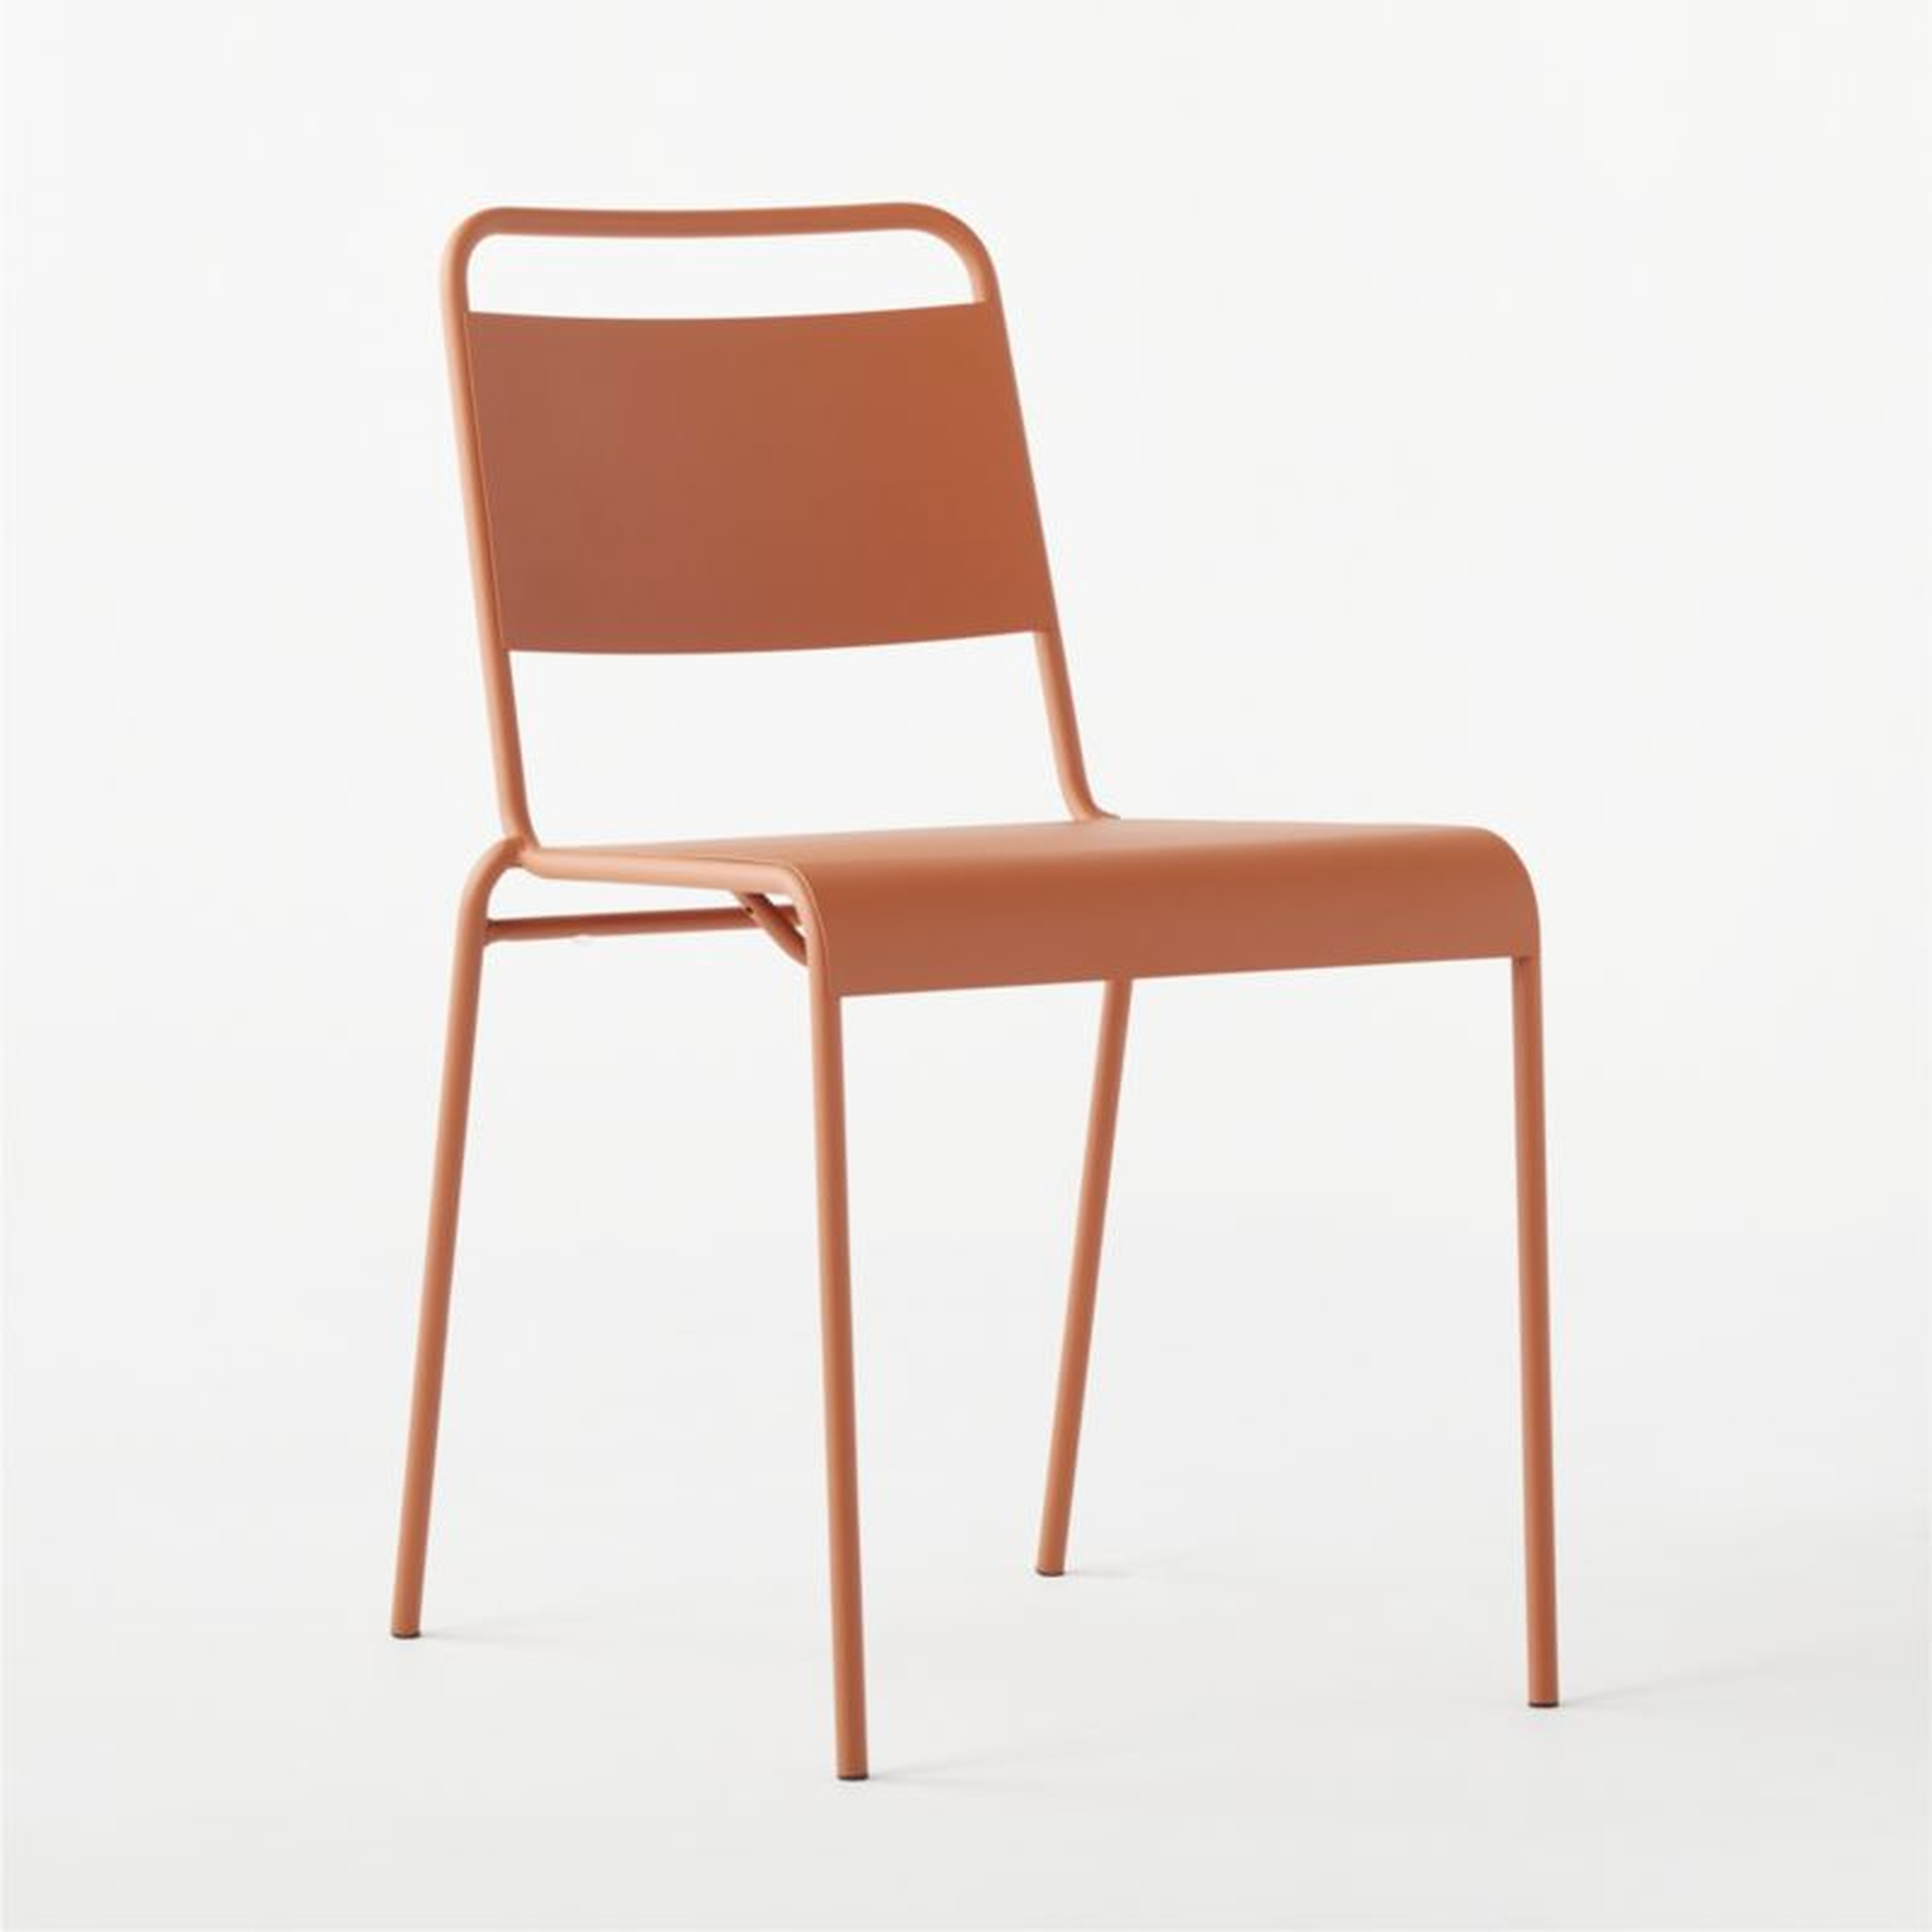 Lucinda Terracotta Outdoor Patio Stacking Chair - CB2